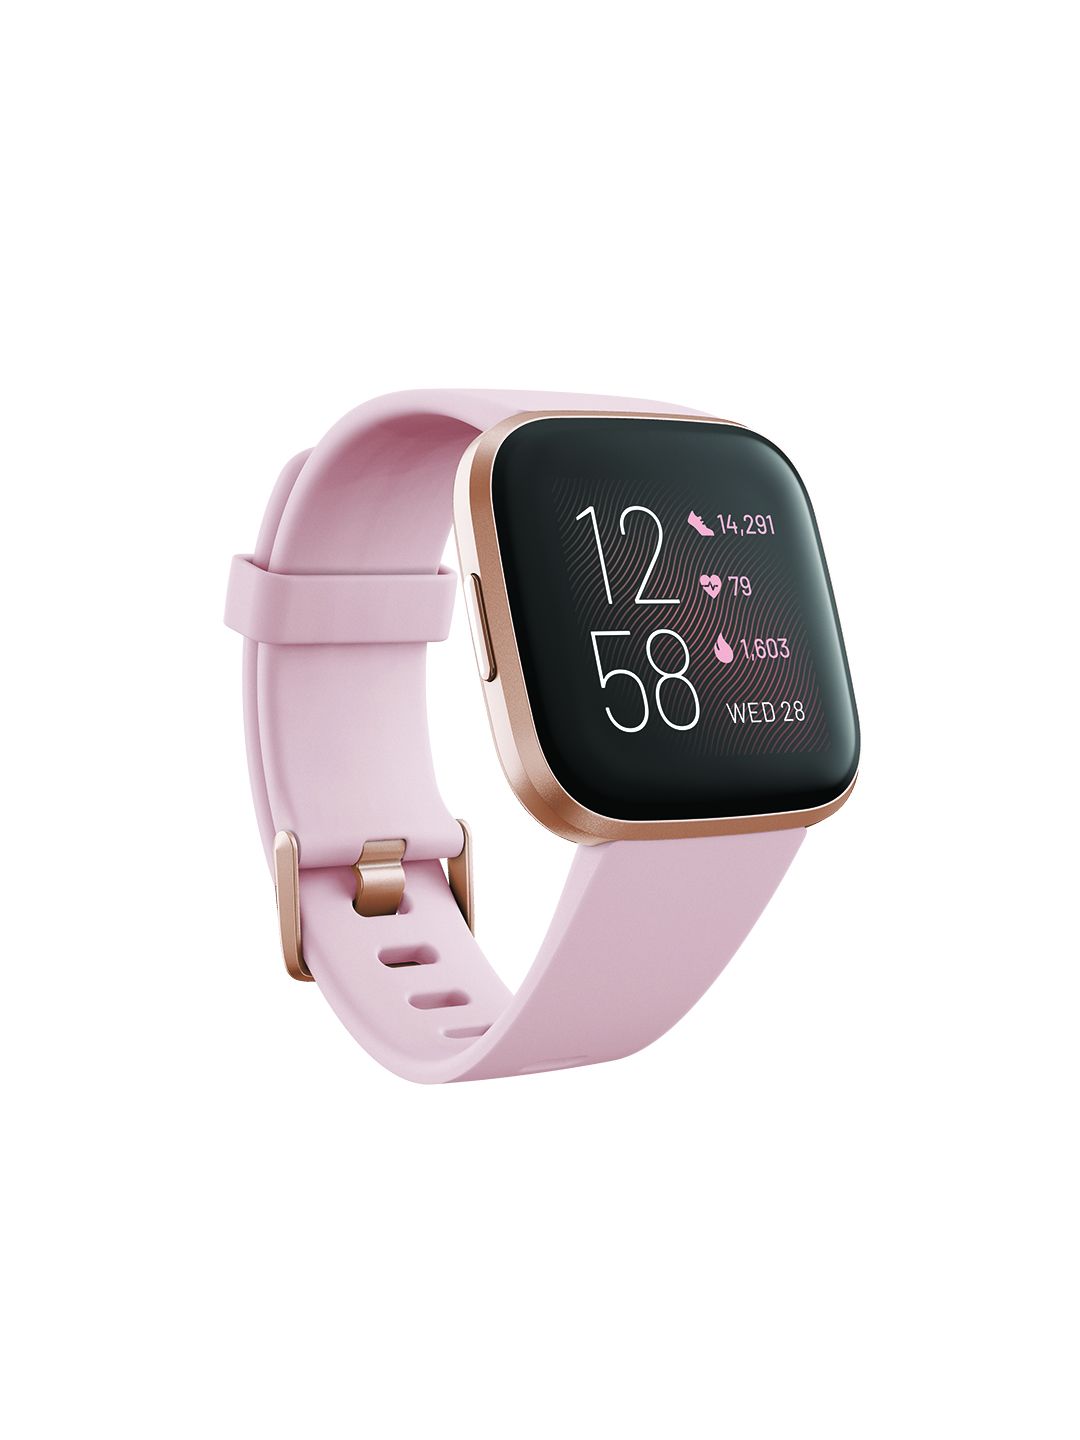 Fitbit Versa2 Petal & Copper Rose Smartwatch with Heart Rate Alexa & Sleep Tracking Price in India